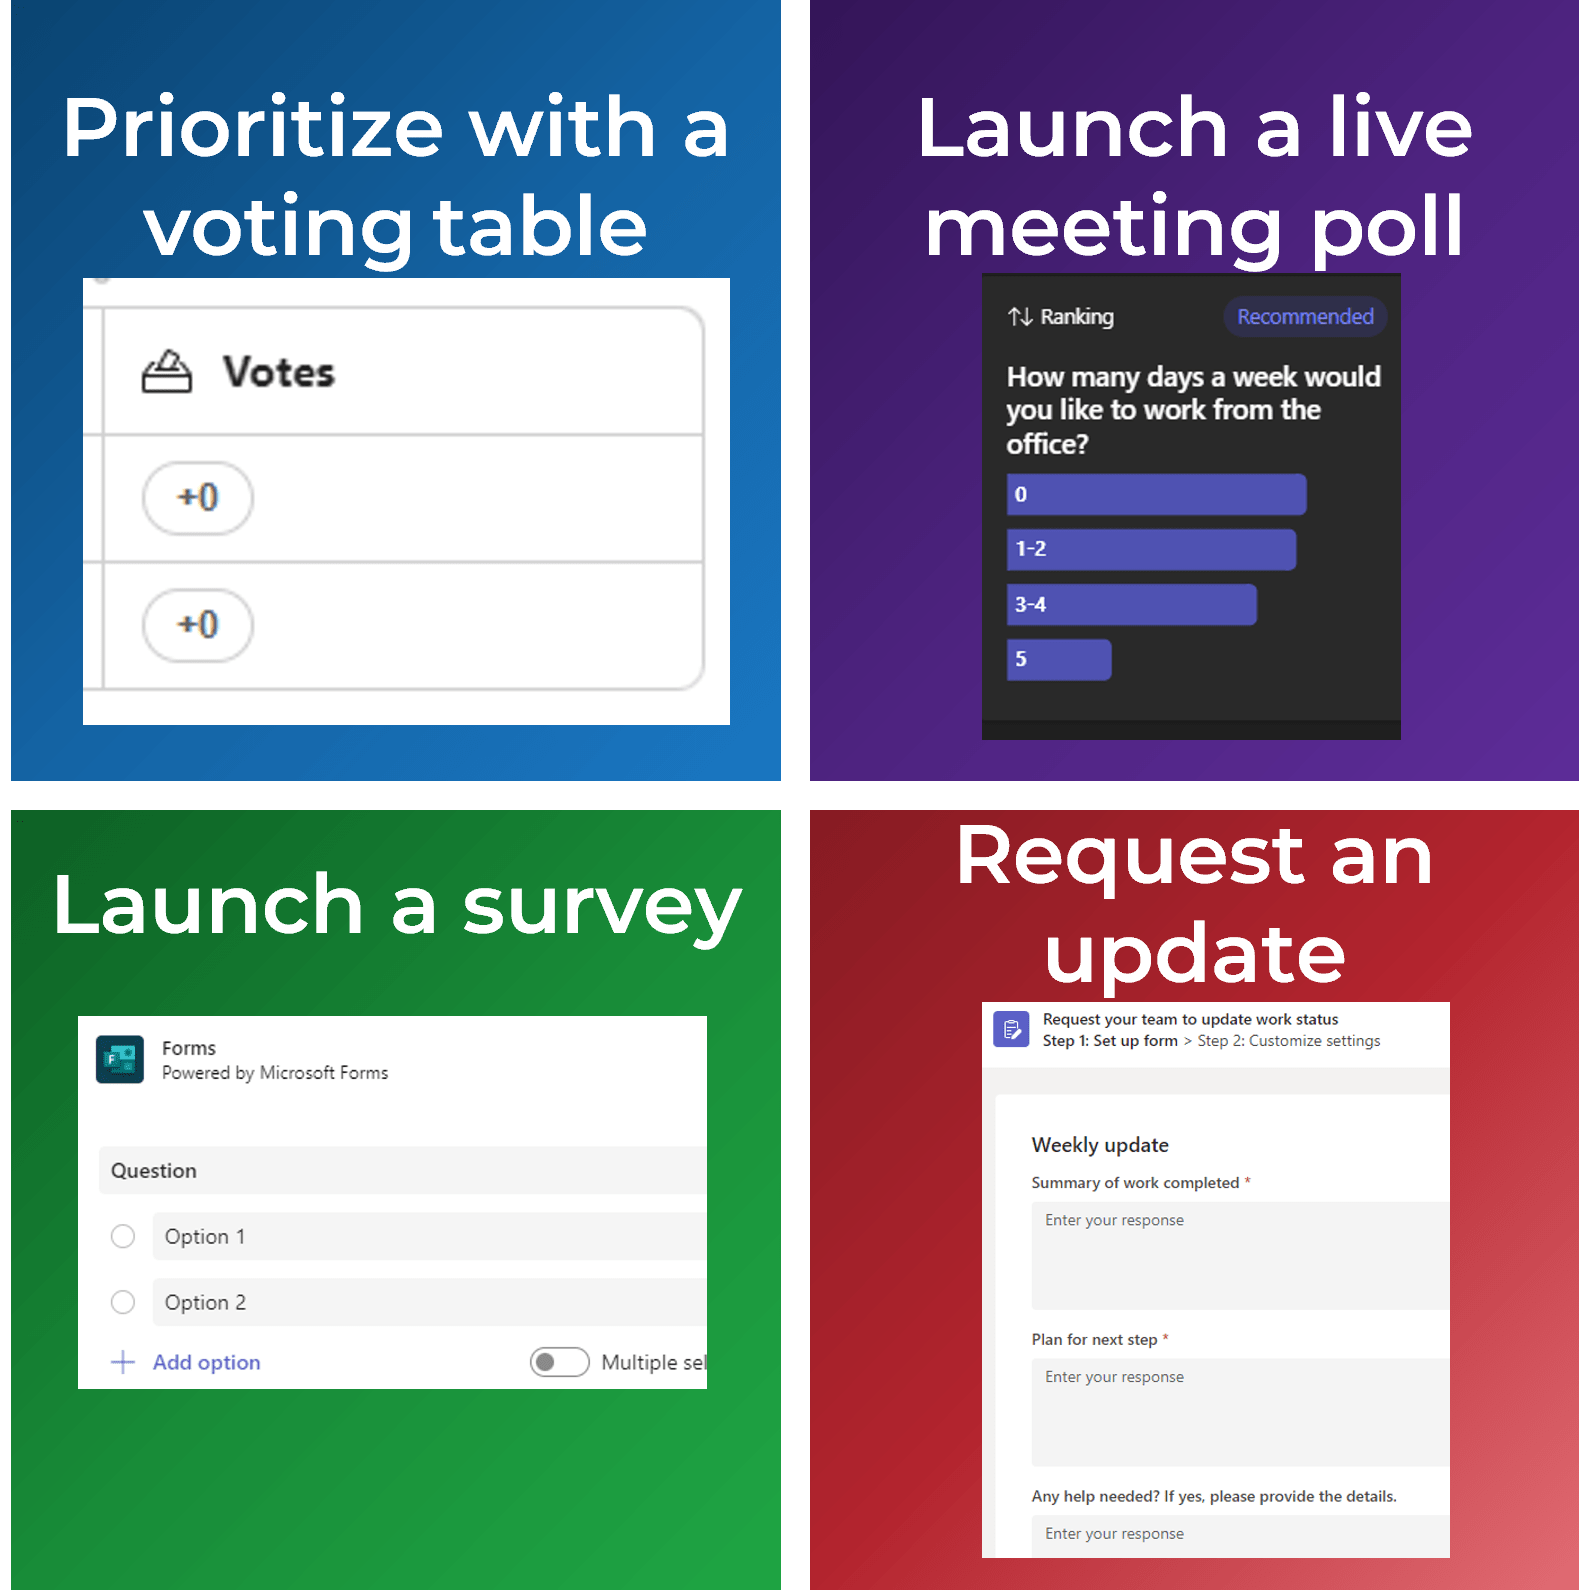 Samples of four features: 'Prioritize with a voting table', 'Launch a live meeting poll', 'Launch a survey', and 'Request an update'.